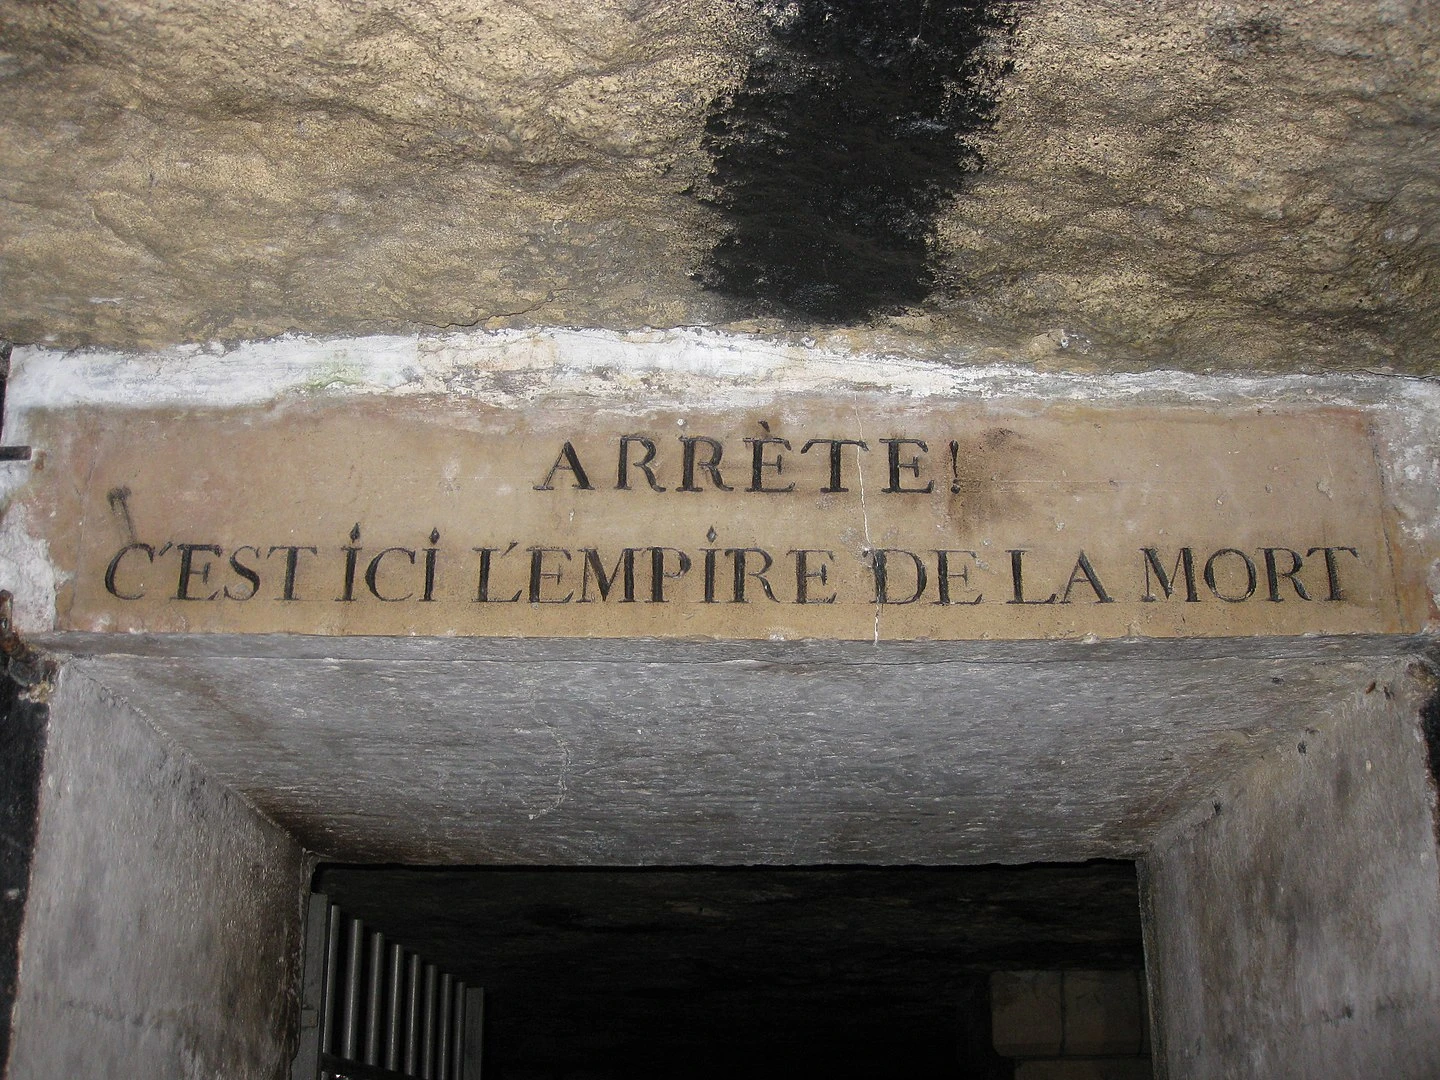 We come across monuments and even signs with thought-provoking phrases, such as this one from the Aeneid. Photo chosen by monsieurdefrance.com: By Deror avi - Own work, CC BY-SA 3.0, https://commons.wikimedia.org/w/index.php?curid=6085673